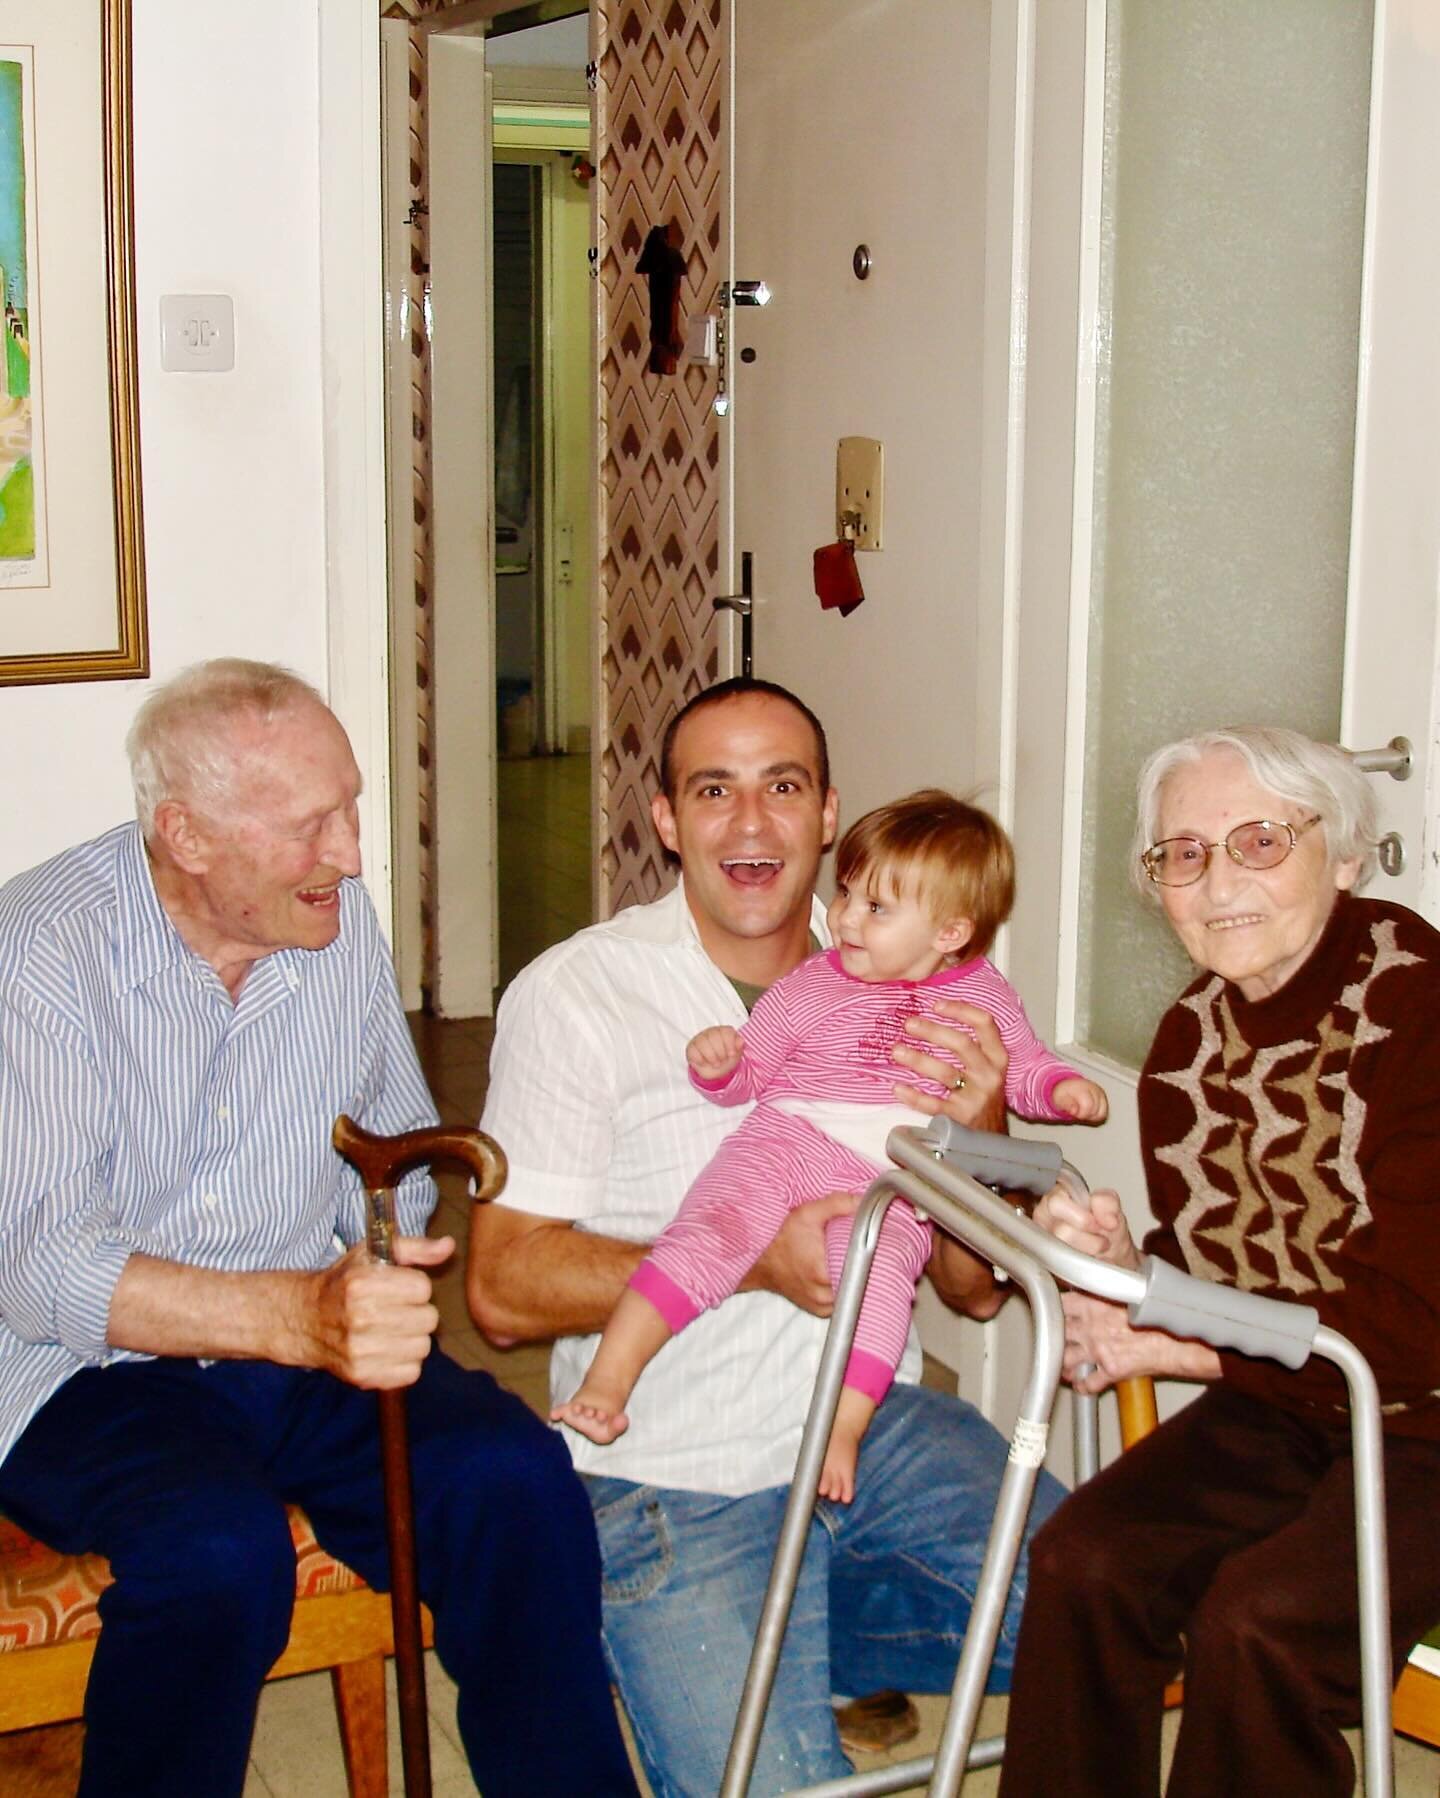 October 19, 2005, Haifa Israel
(18 years ago today)
✨✨✨
Ori &amp; I took Ruby to meet her maternal great grandparents, Bella &amp; Isaac, upon her turning one years old. We felt it was important to make this trip since they were already in their 90&r